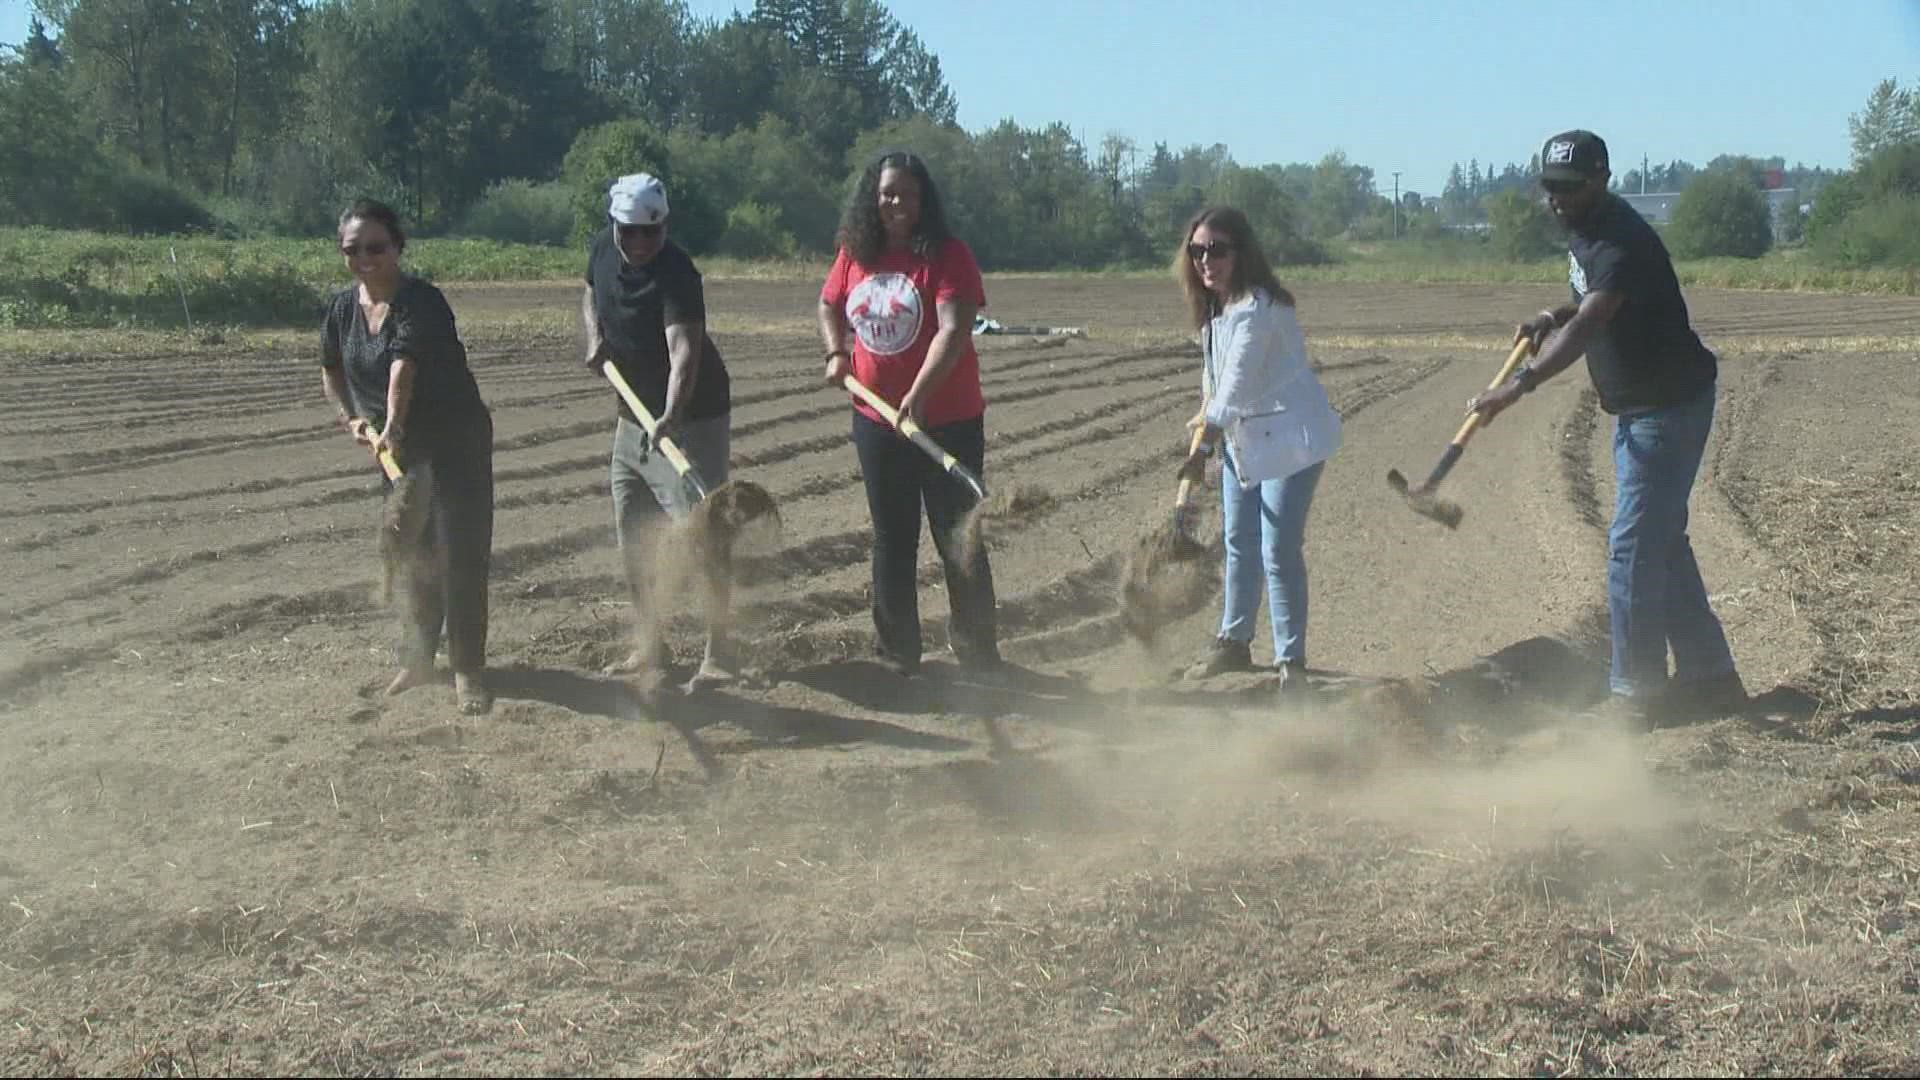 A new Black-owned farm is being developed in Troutdale with $500,000 in grant money from Multnomah County